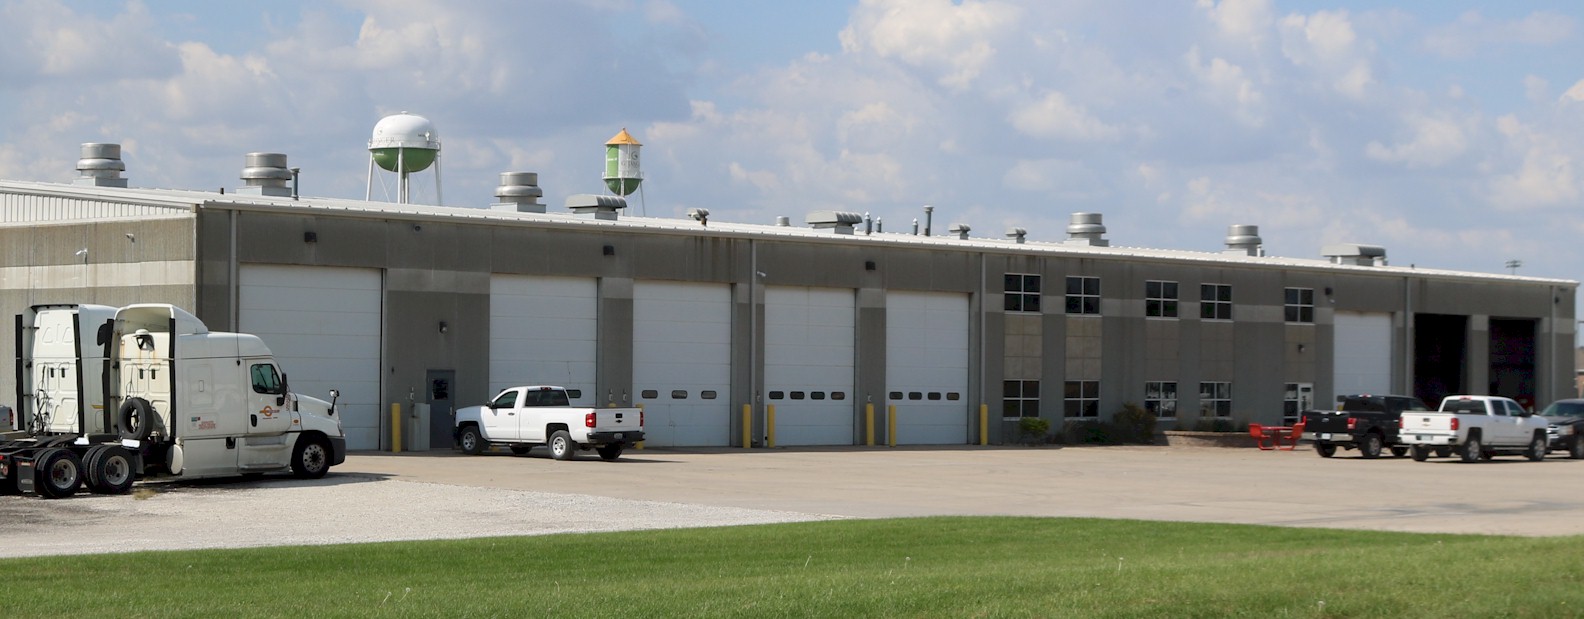 Barr-Nunn Granger, IA truck terminal building in the Des Moines, IA area showing service bays